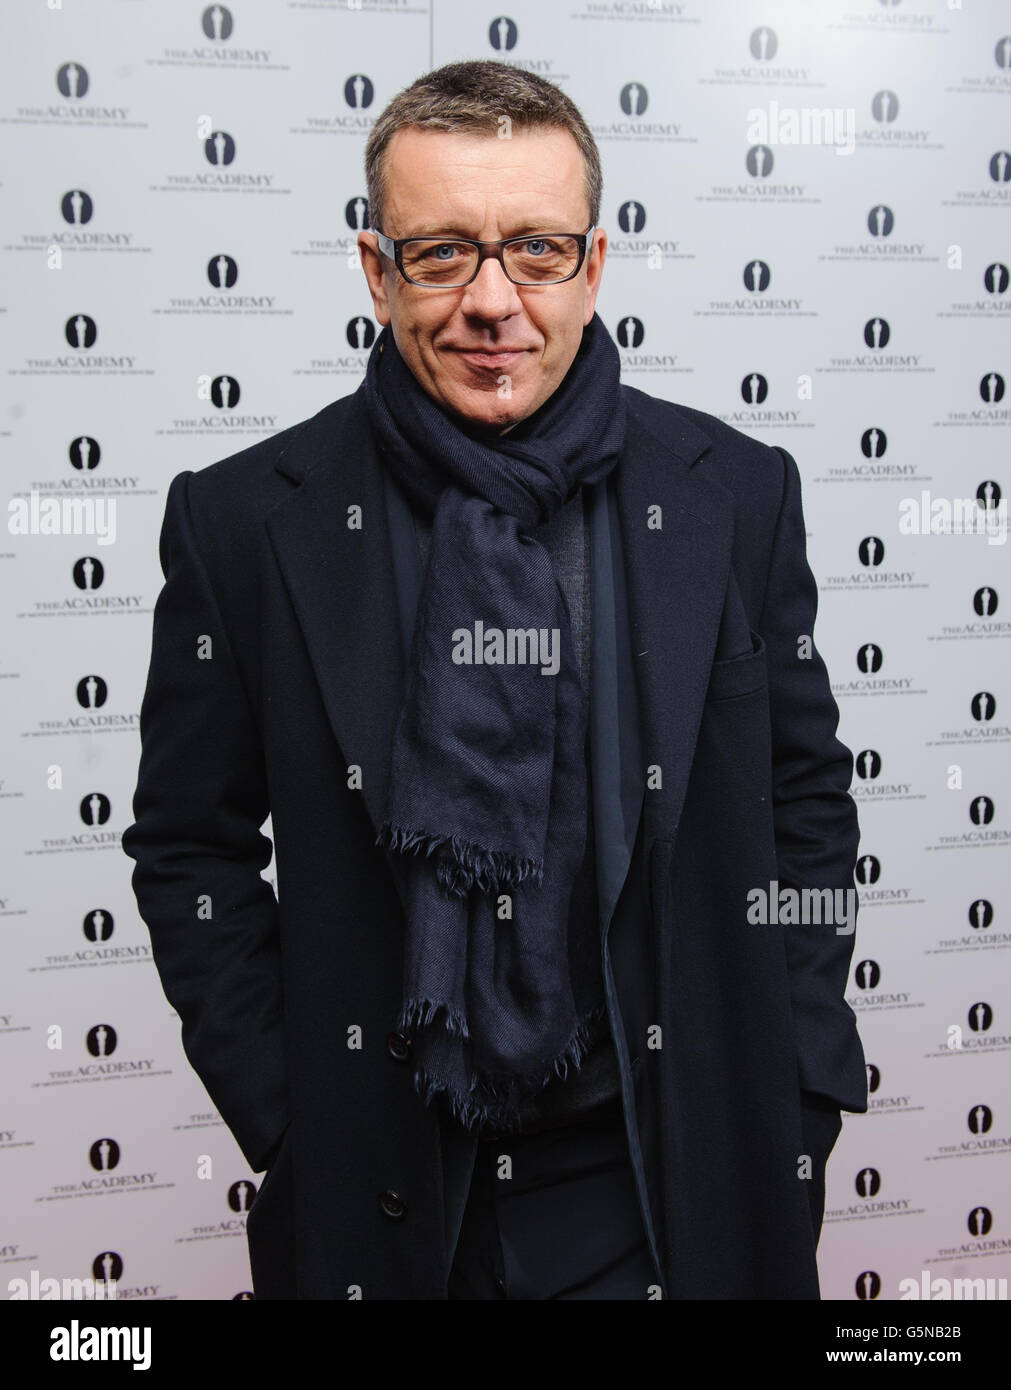 Peter Morgan arriving at the Academy of Motion Picture Arts and Sciences celebration of the career of Pedro Almodovar, at the Curzon Soho Cinema, in central London. Stock Photo